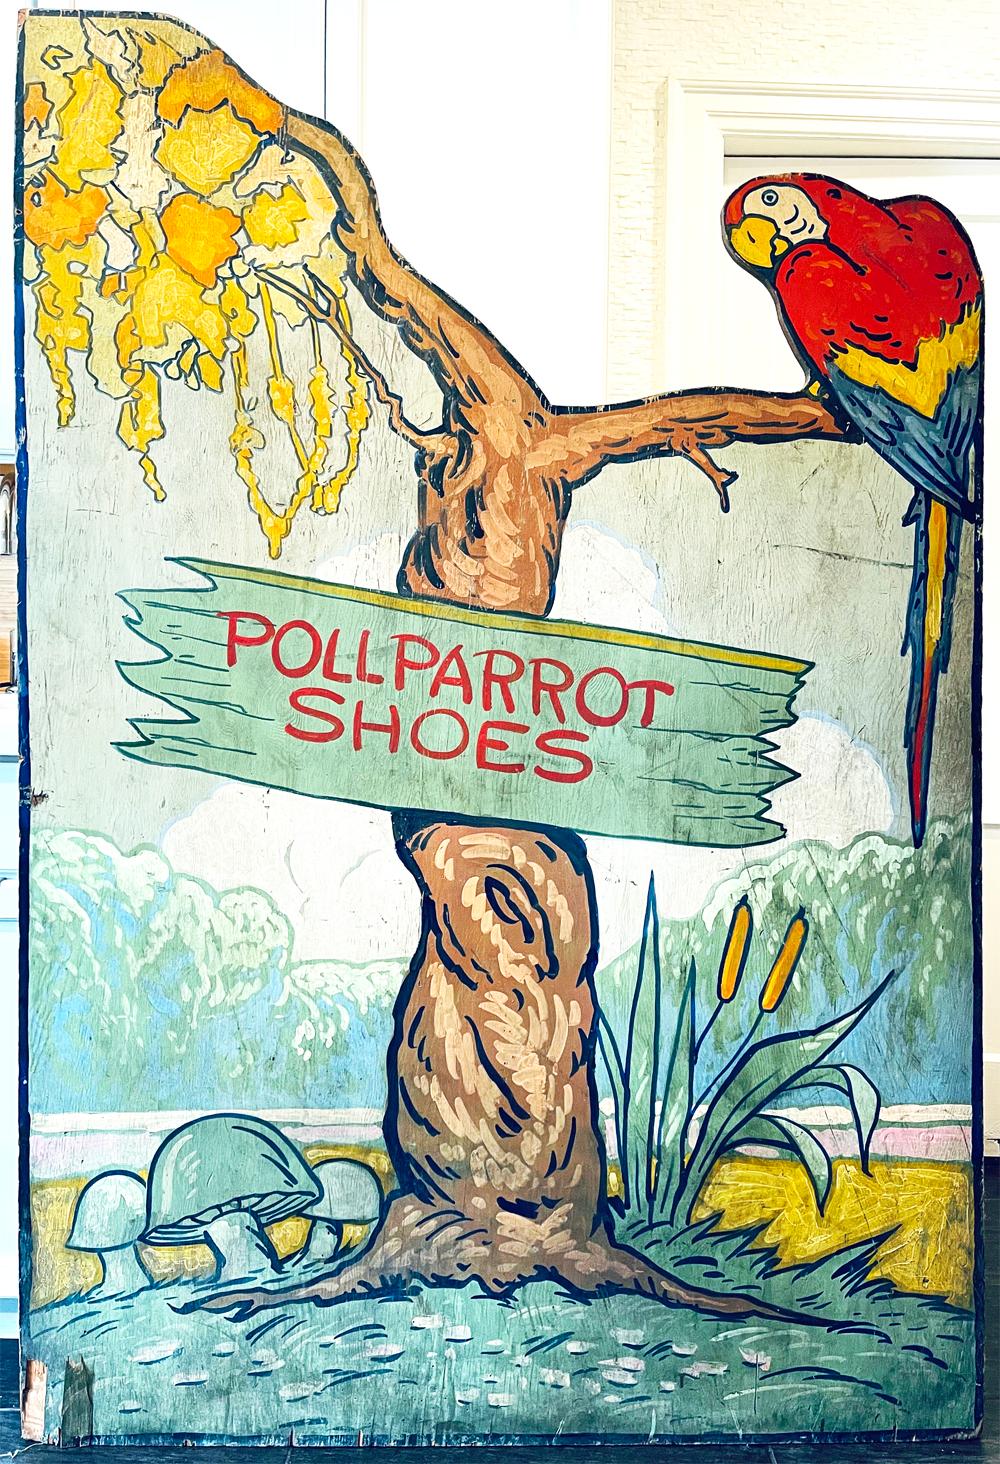 Brilliantly painted by a commercial artist, this large, rare sign panel may have been the most ambitious marketing piece ever created by the Poll-Parrot Shoe Company, one of America’s leading purveyors of children’s shoes from the early 20th century